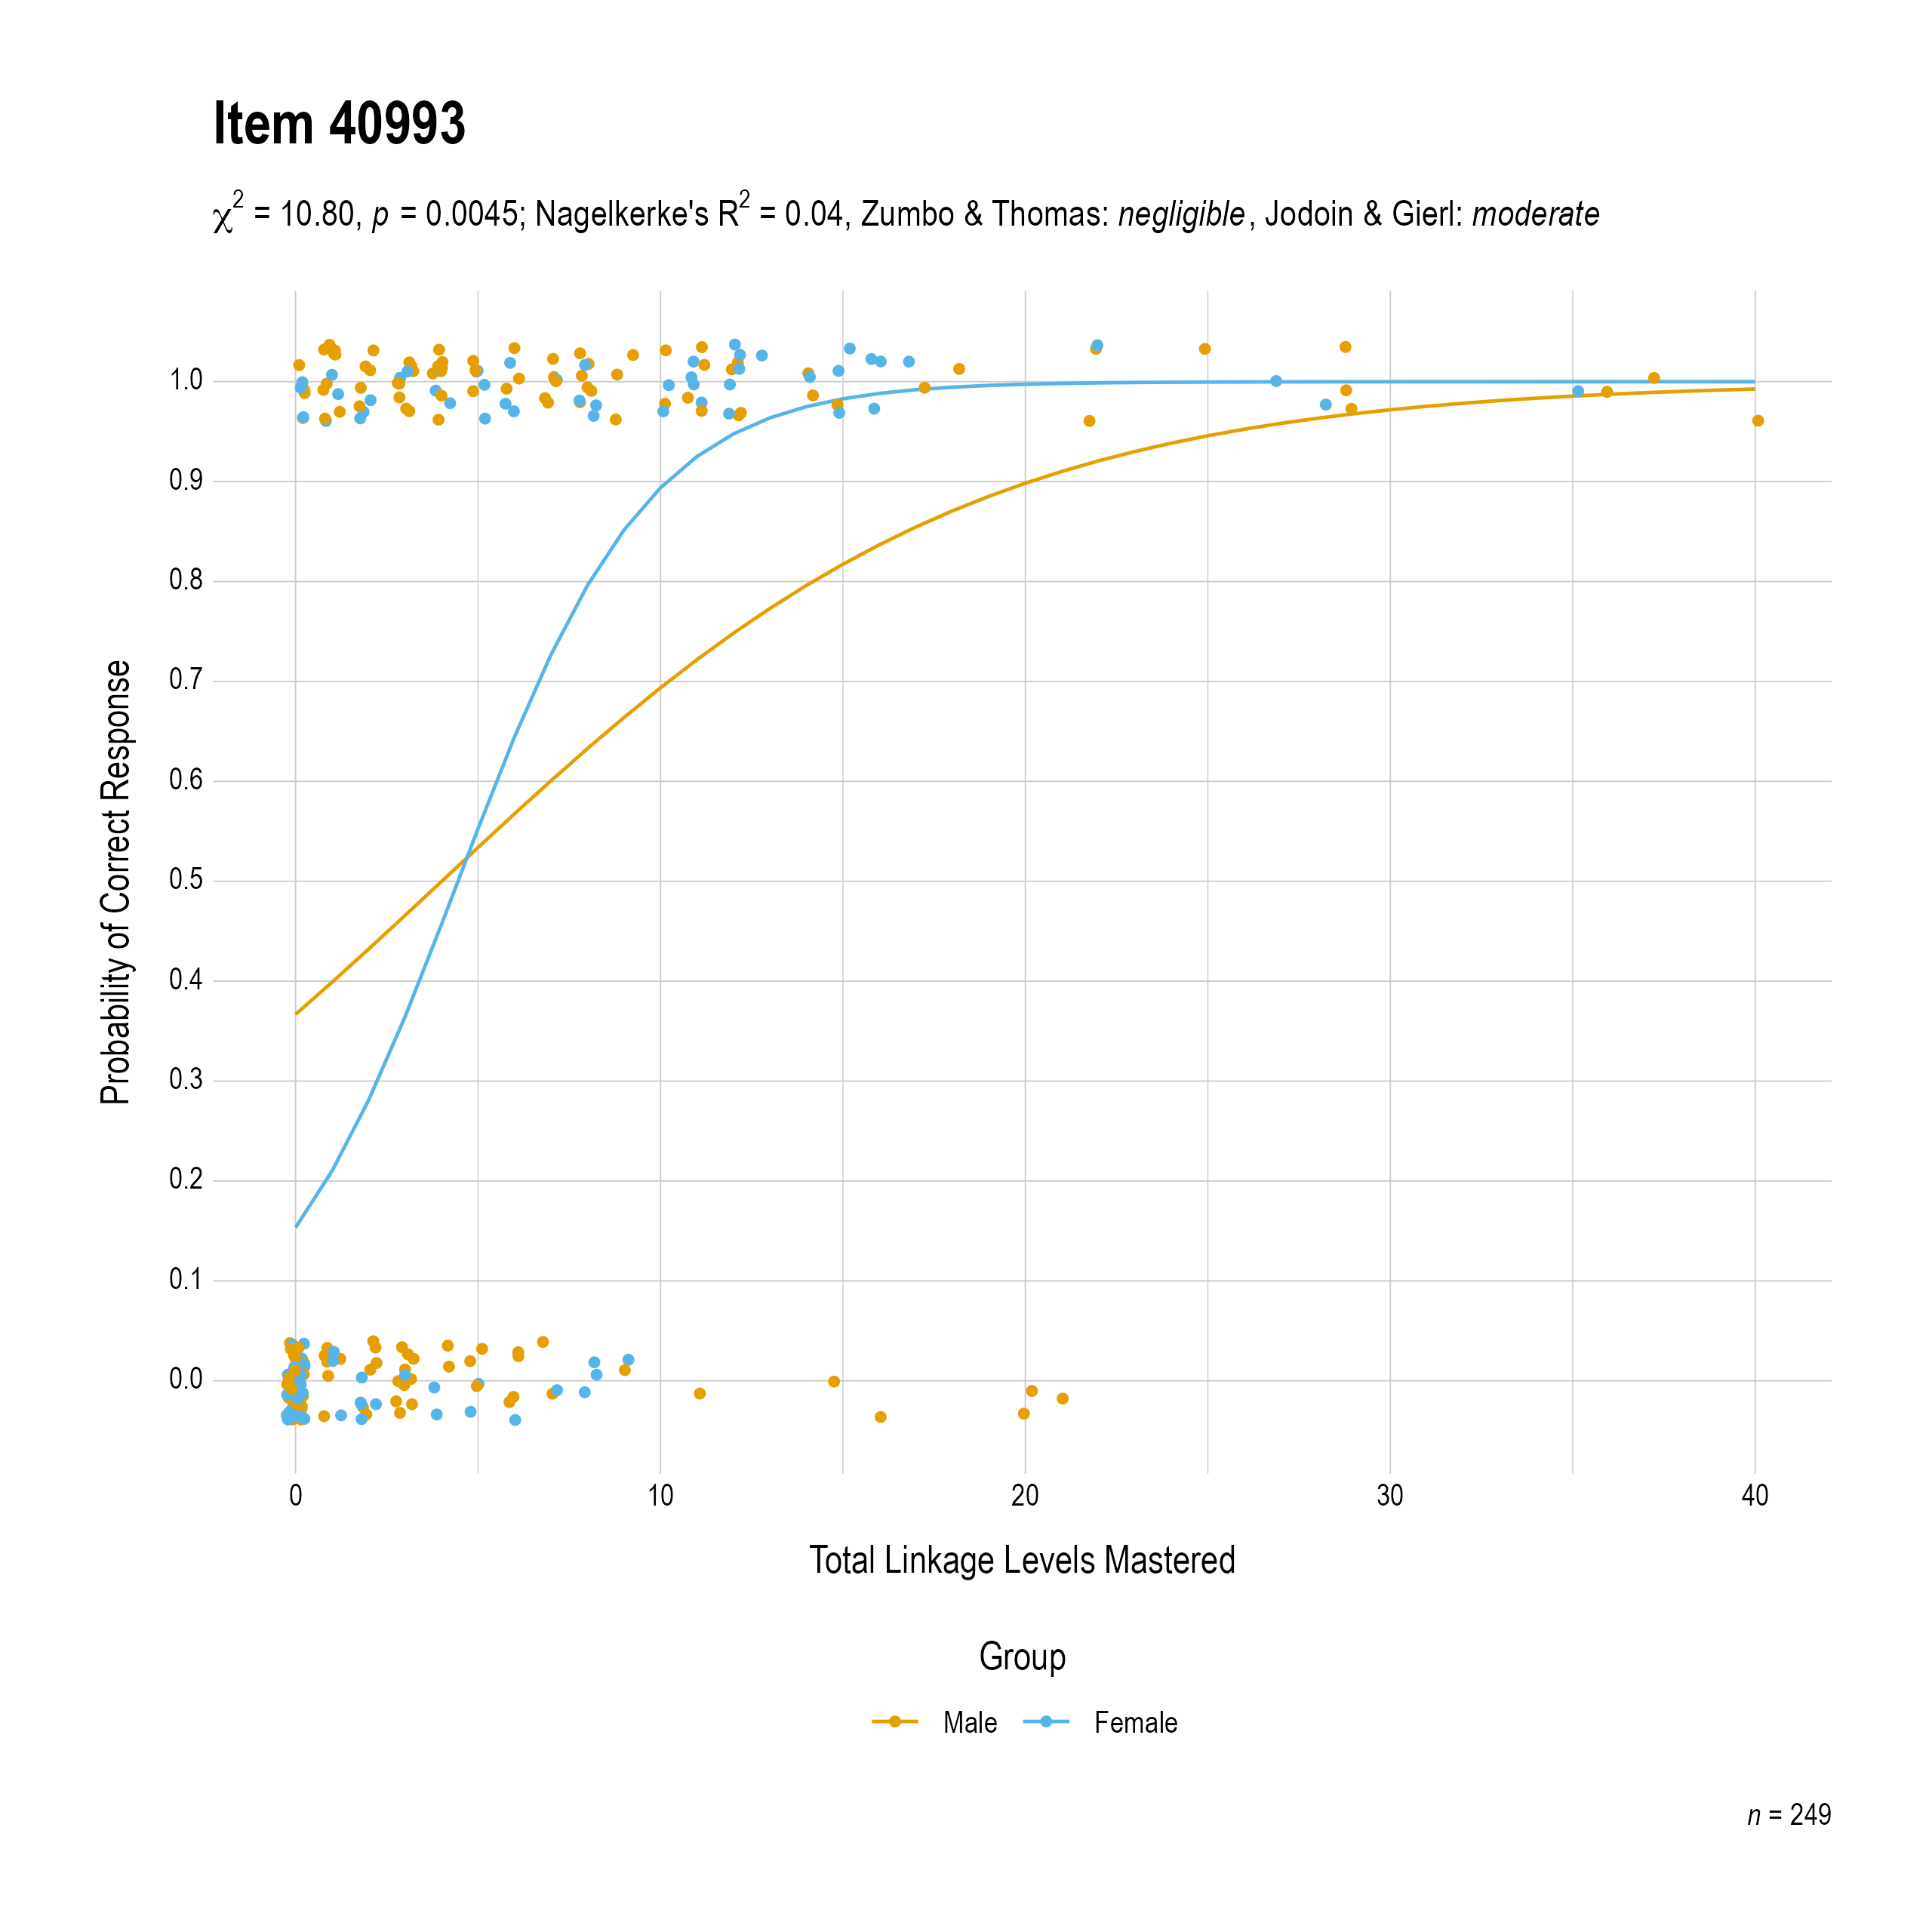 The plot of the combined gender differential item function evidence for English language arts item 40993. The figure contains points shaded by group. The figure also contains a logistic regression curve for each group. The total linkage levels mastered in is on the x-axis, and the probability of a correct response is on the y-axis.